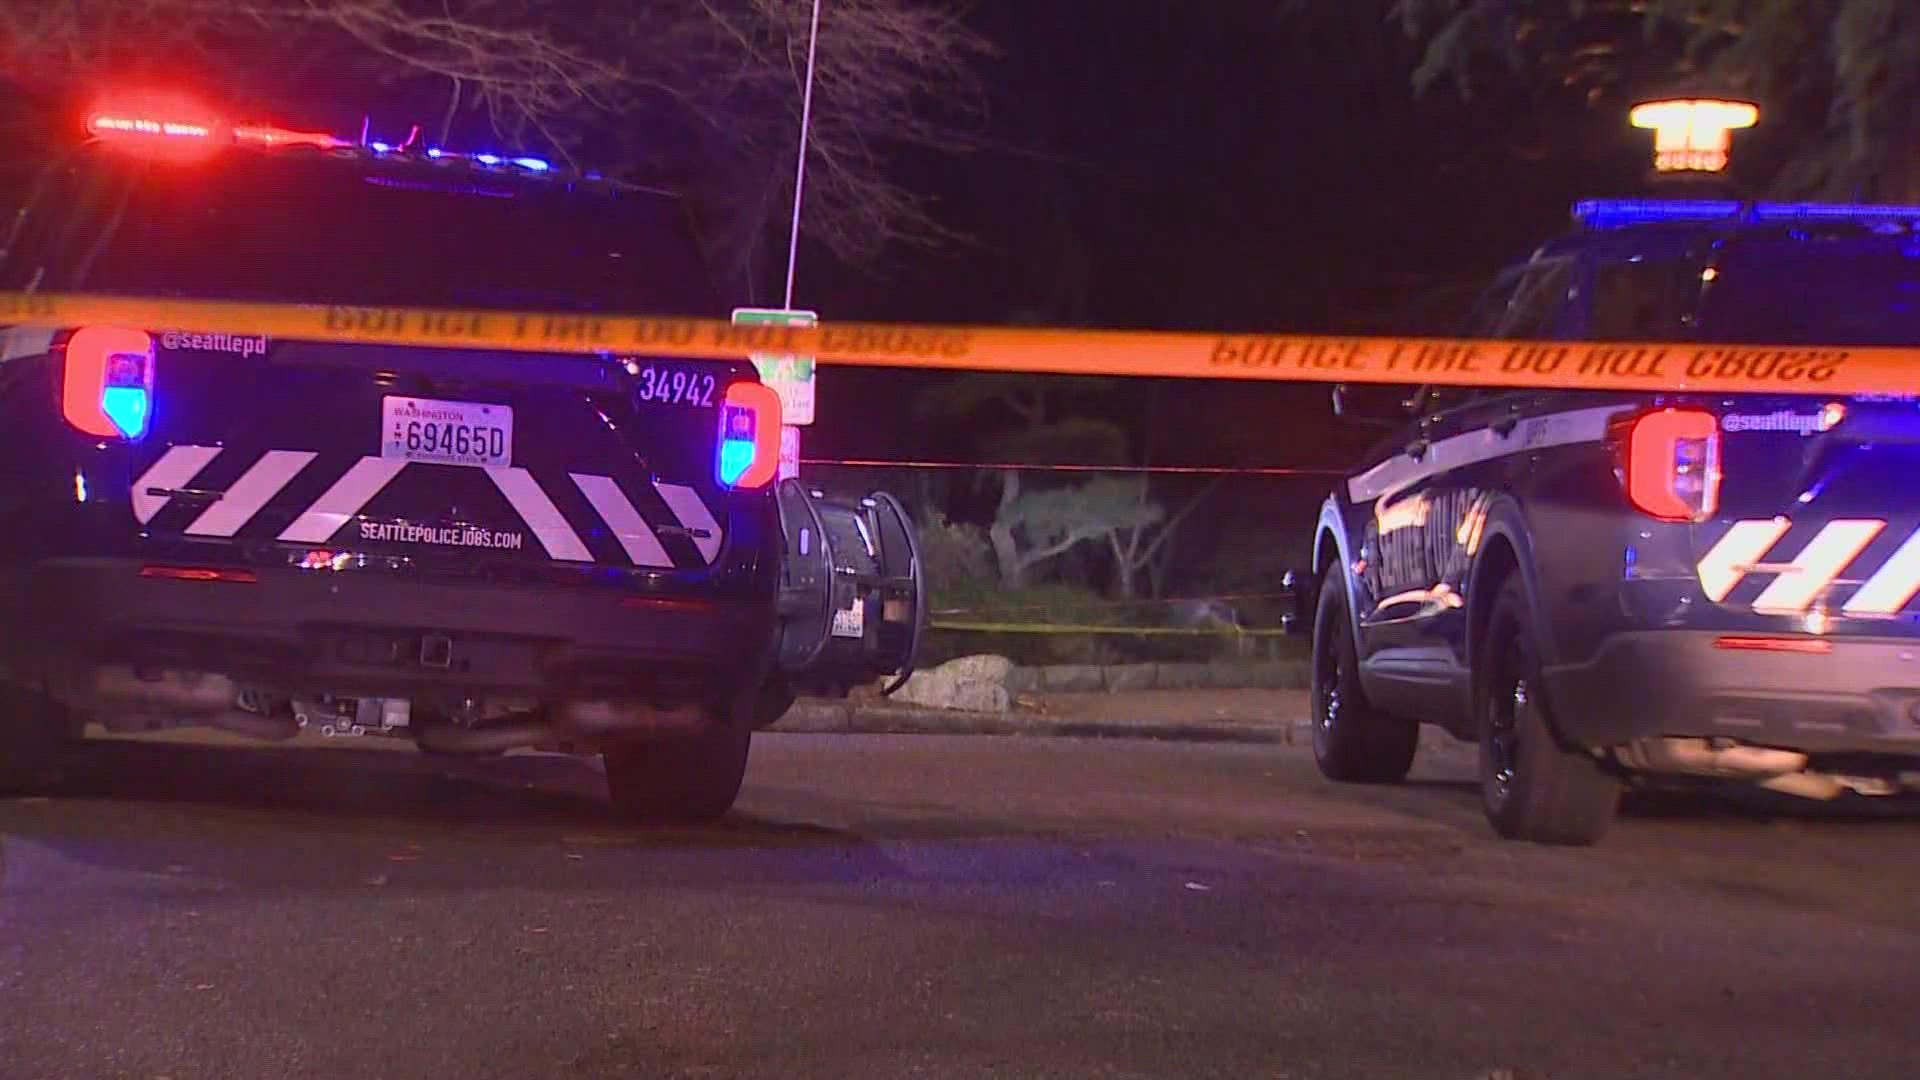 Police are investigating after two people were killed and two others injured in three separate shootings in western Washington early Friday morning.